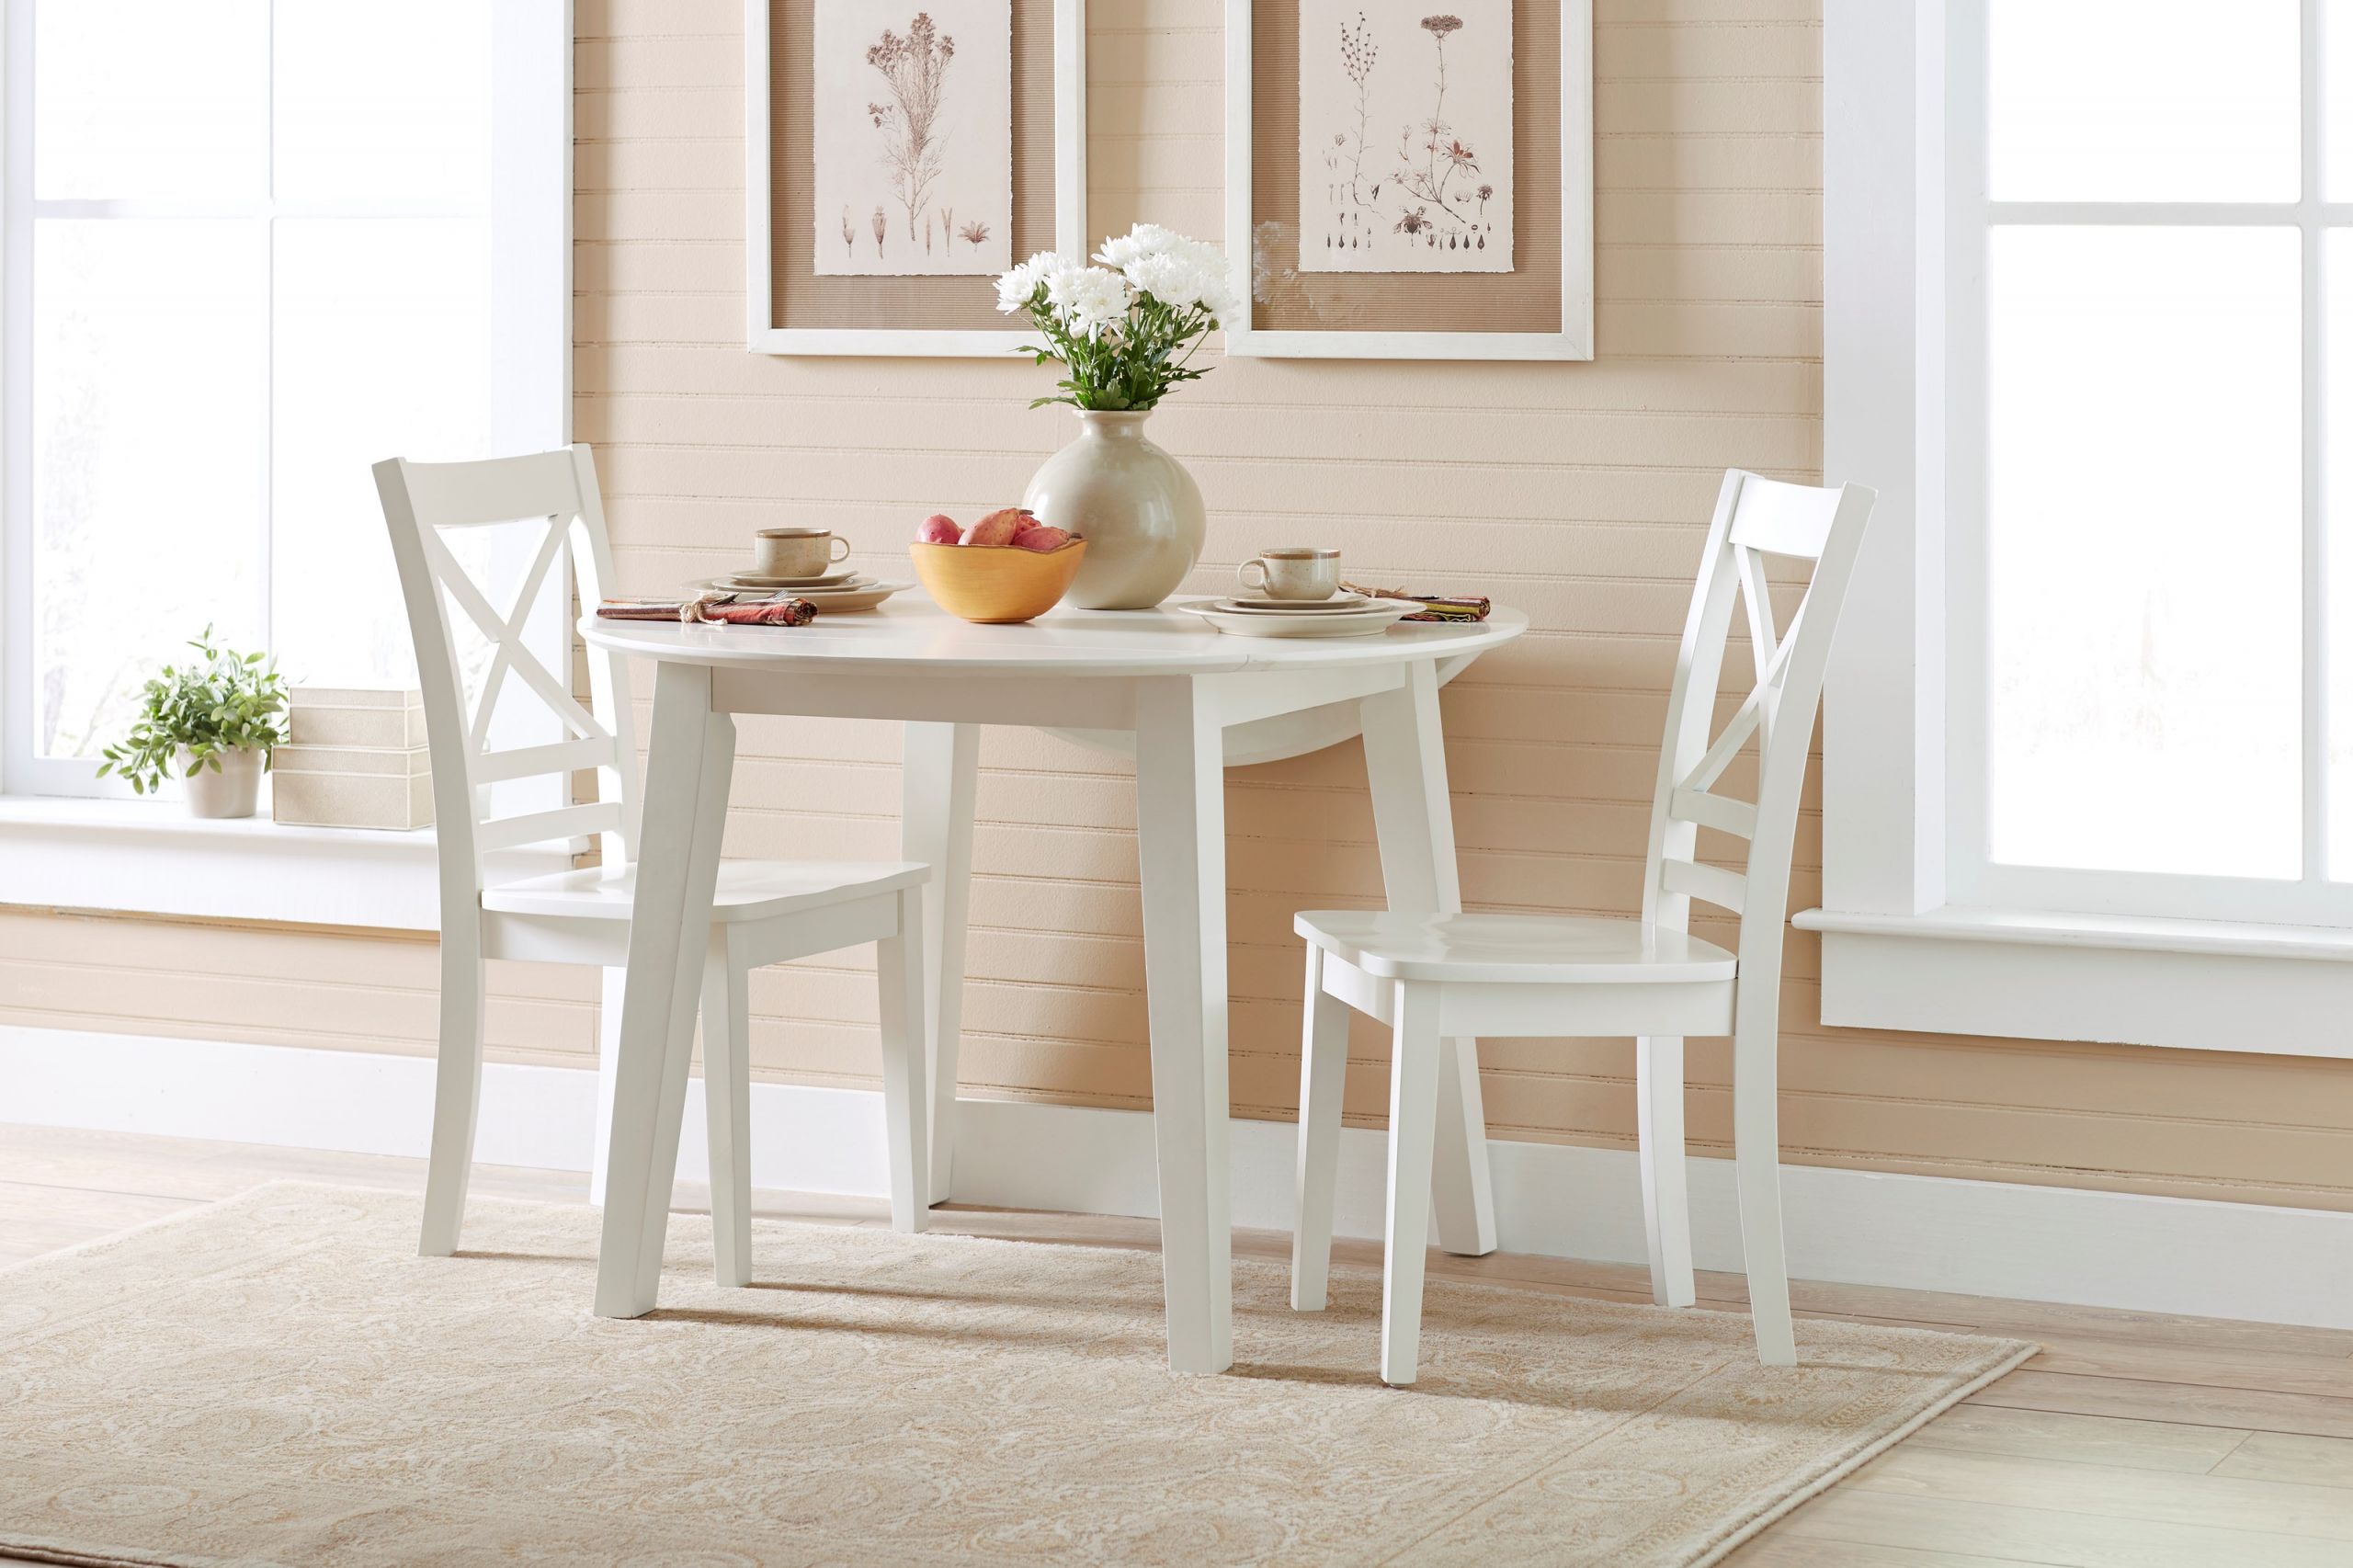 Table For Small Kitchen
 Jofran 3x3x3 White Round Table and 2 Chair Set with "X